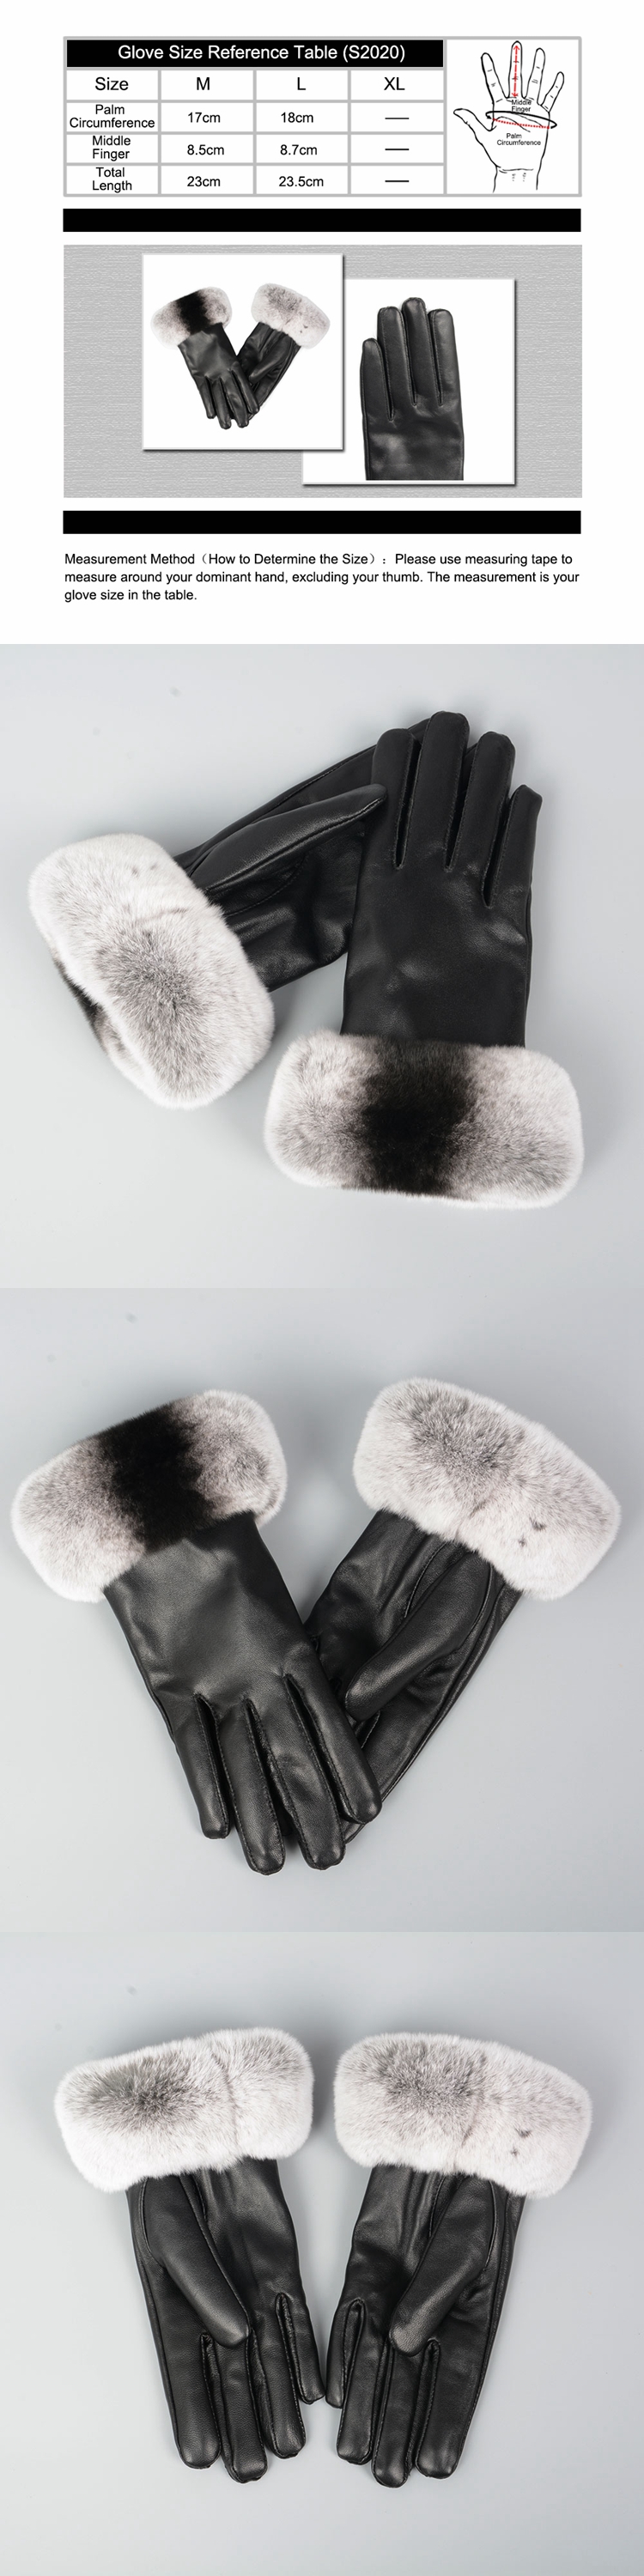 Women's 100% Real Sheepskin Leather Gloves Lady Winter Warm Fashion Mittens with Real Rabbit Fur